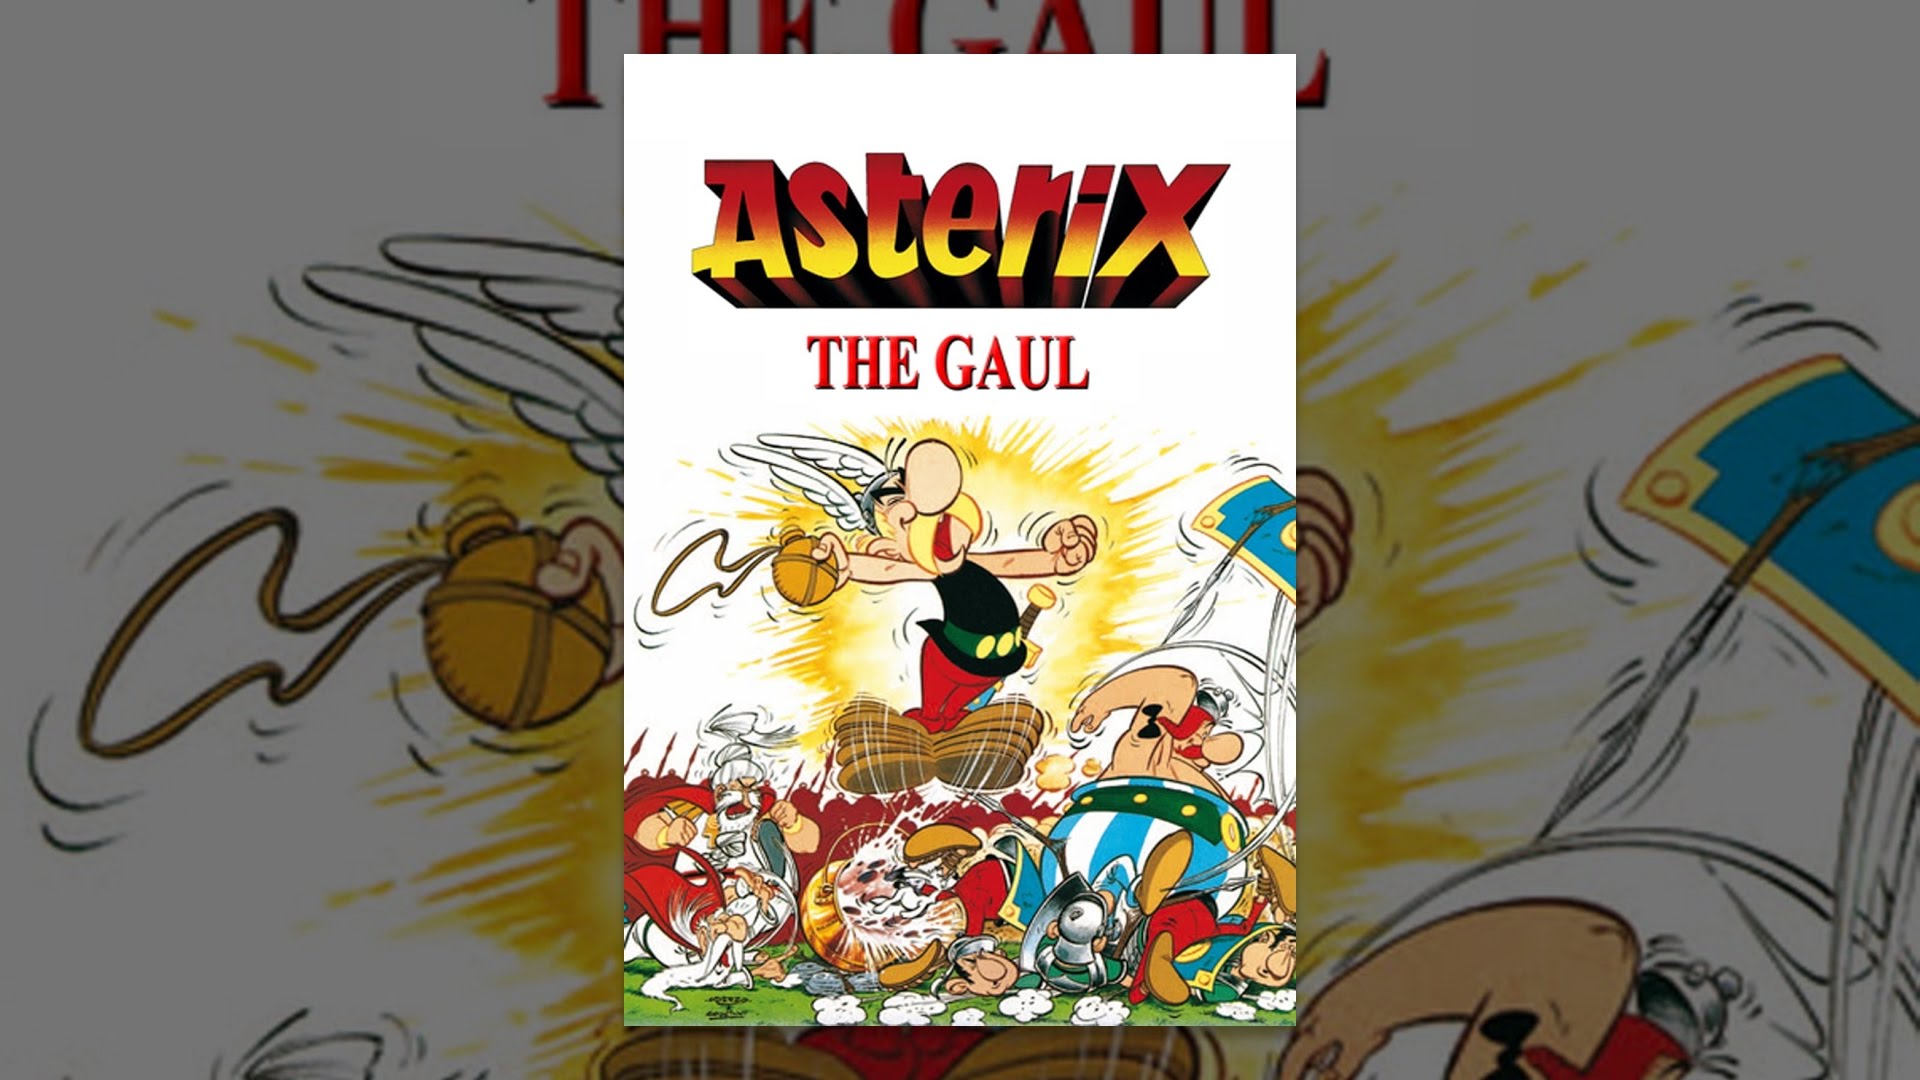 Download Asterix the Gaul